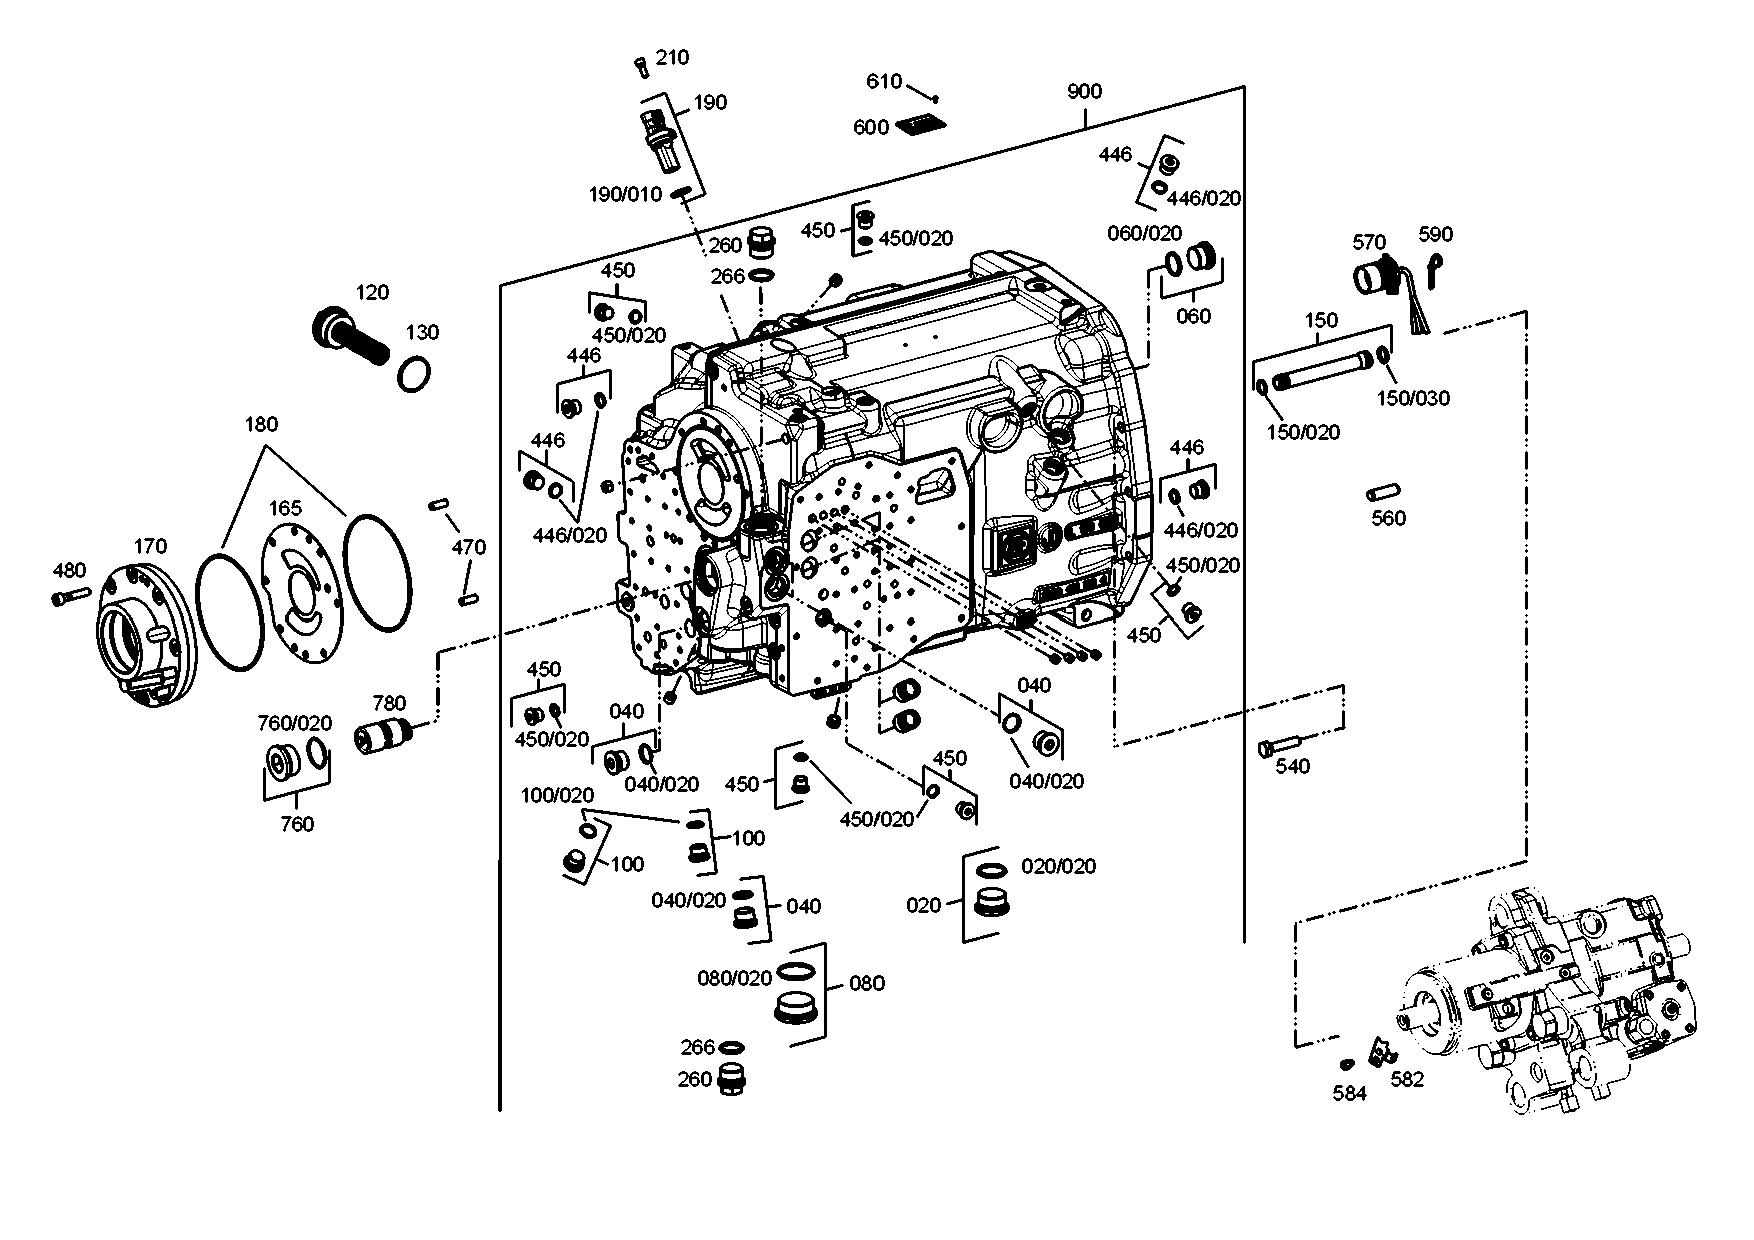 drawing for CASE CORPORATION 100080A1 - O-RING (figure 5)